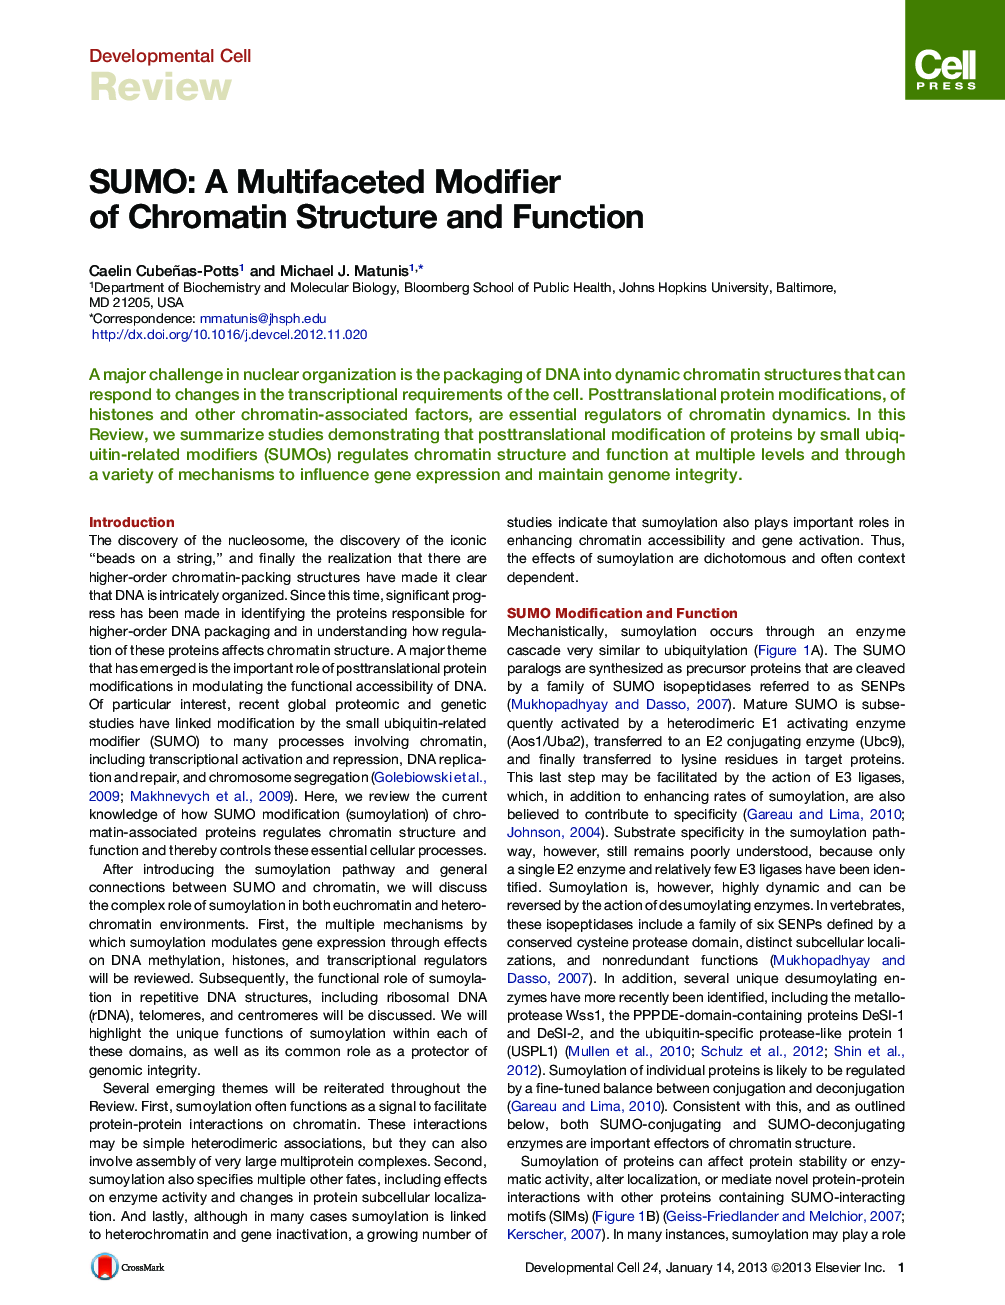 SUMO: A Multifaceted Modifier of Chromatin Structure and Function